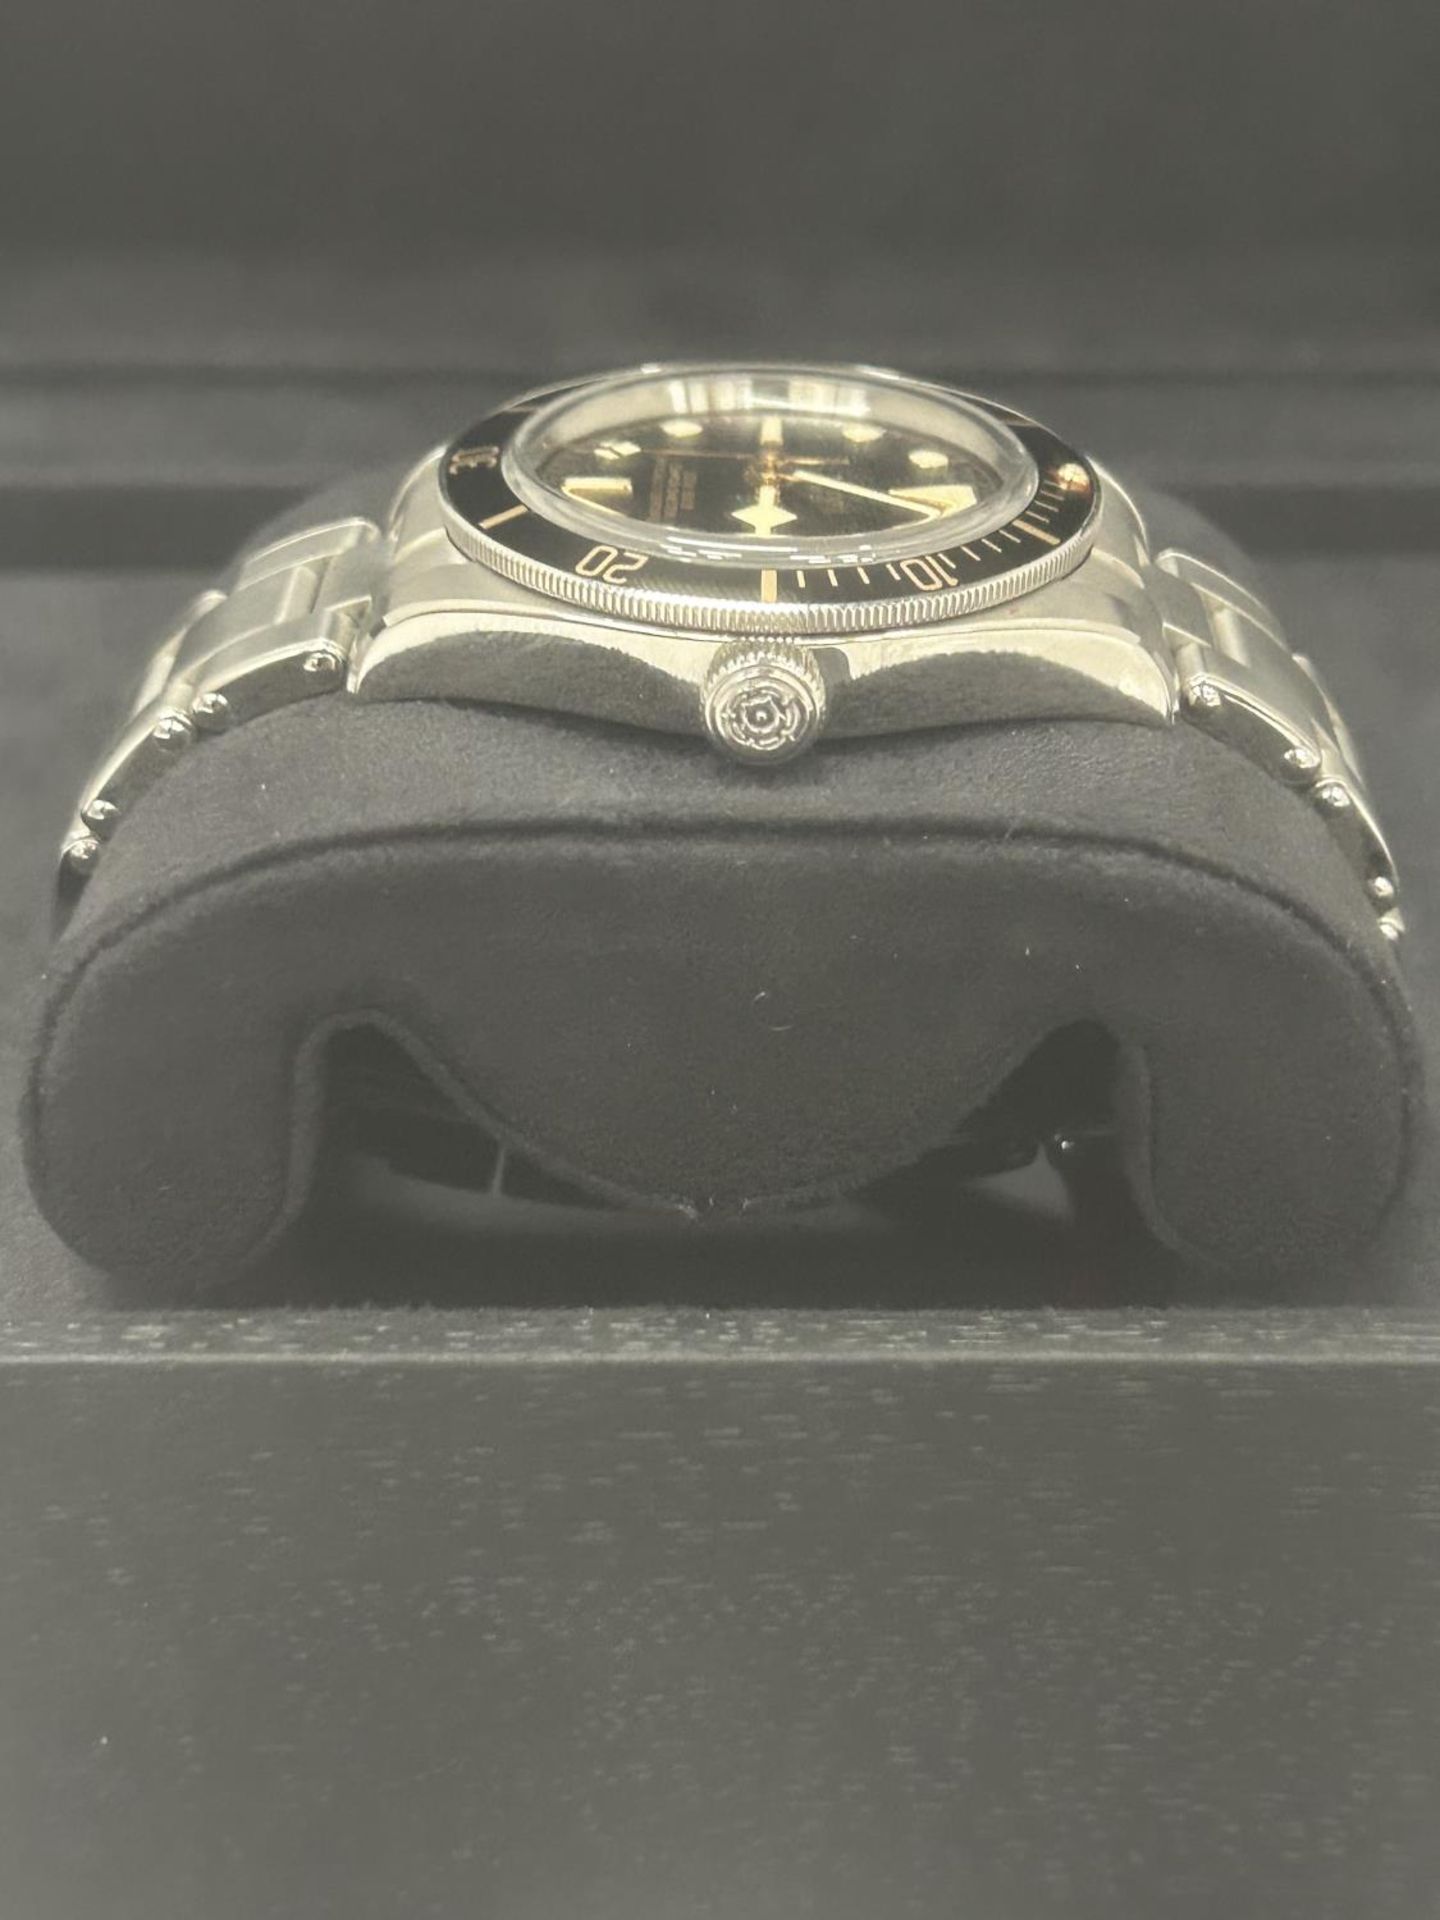 A TUDOR BLACK BAY 58 CHRONOGRAPH AUTOMATIC WATCH WITH 39MM BLACK DIAL, COMPLETE WITH ORIGINAL BOX - Image 4 of 7